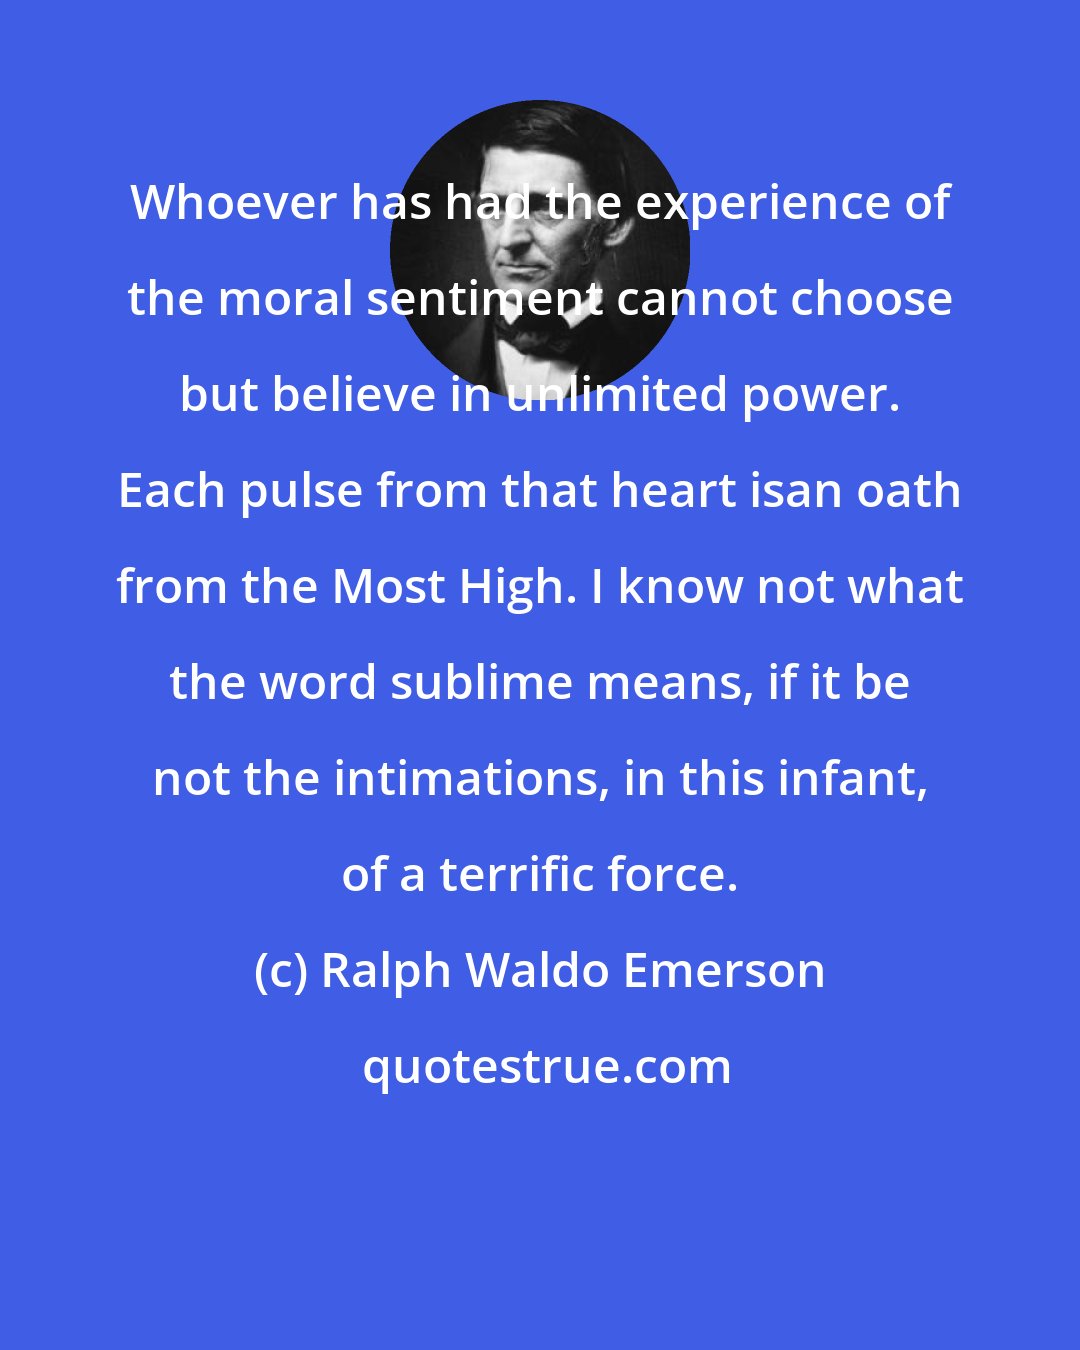 Ralph Waldo Emerson: Whoever has had the experience of the moral sentiment cannot choose but believe in unlimited power. Each pulse from that heart isan oath from the Most High. I know not what the word sublime means, if it be not the intimations, in this infant, of a terrific force.